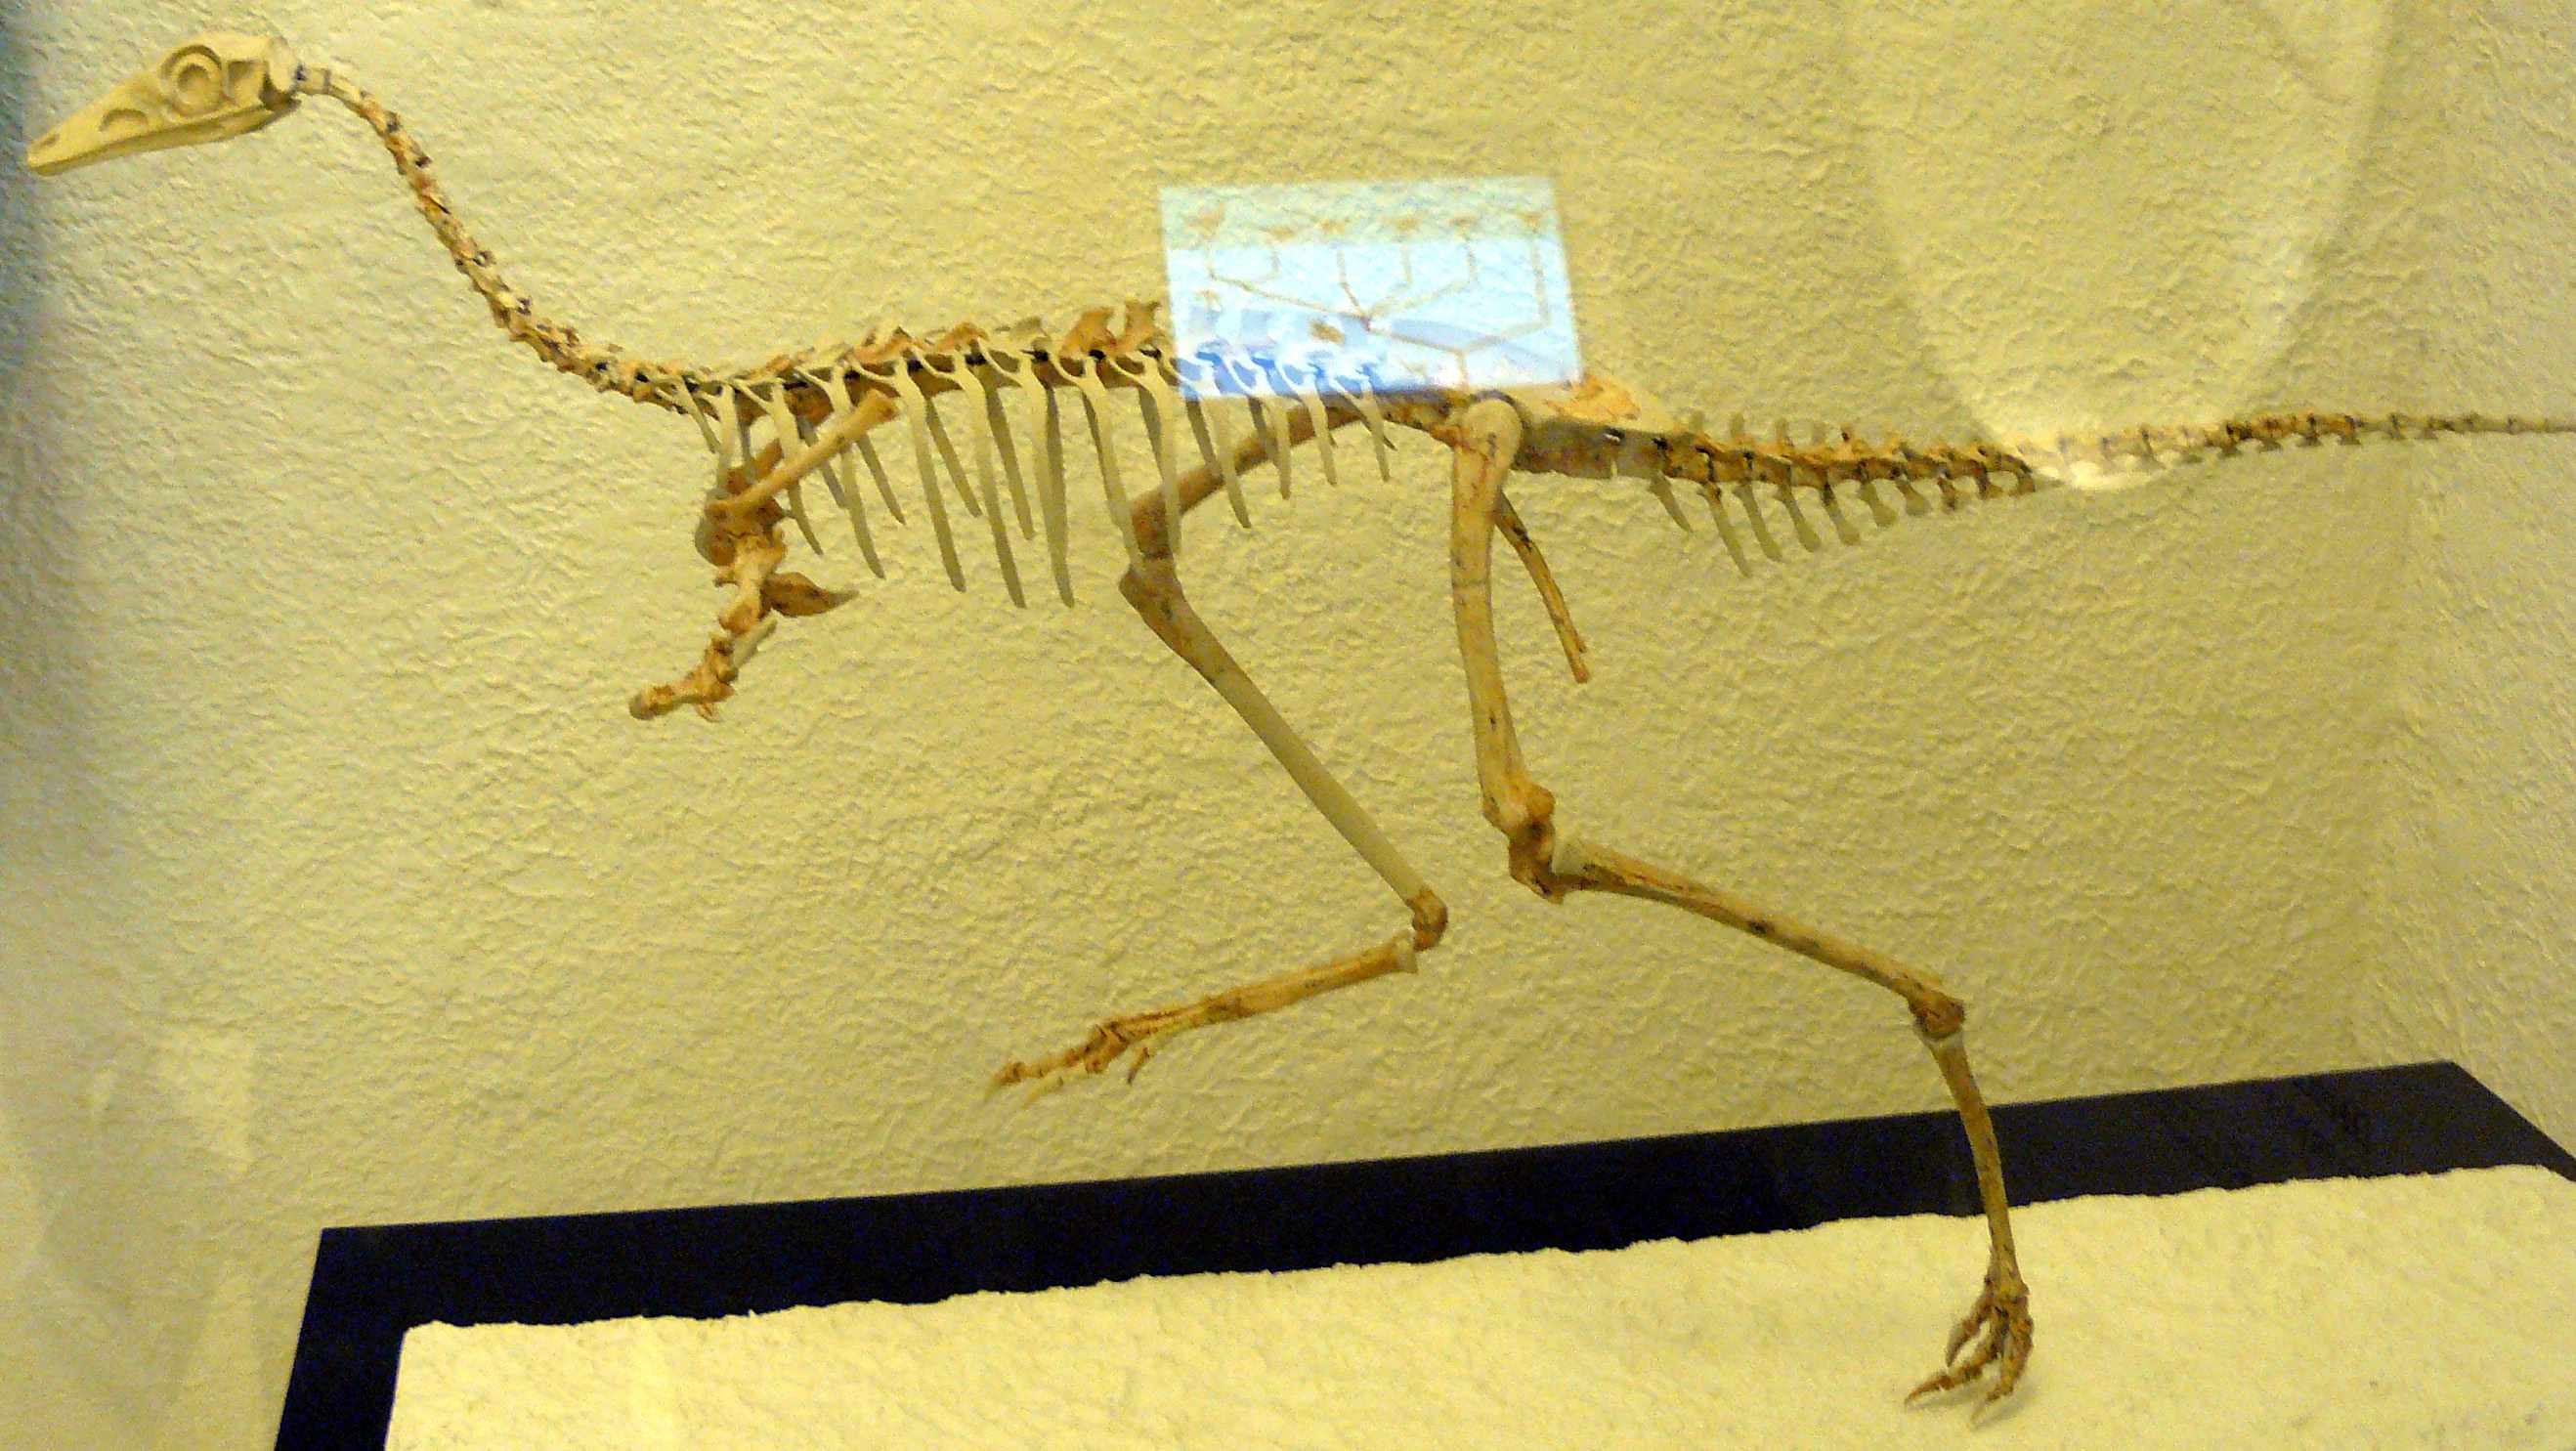 The Ceratonykus fossils date back to the Late Cretaceous period.